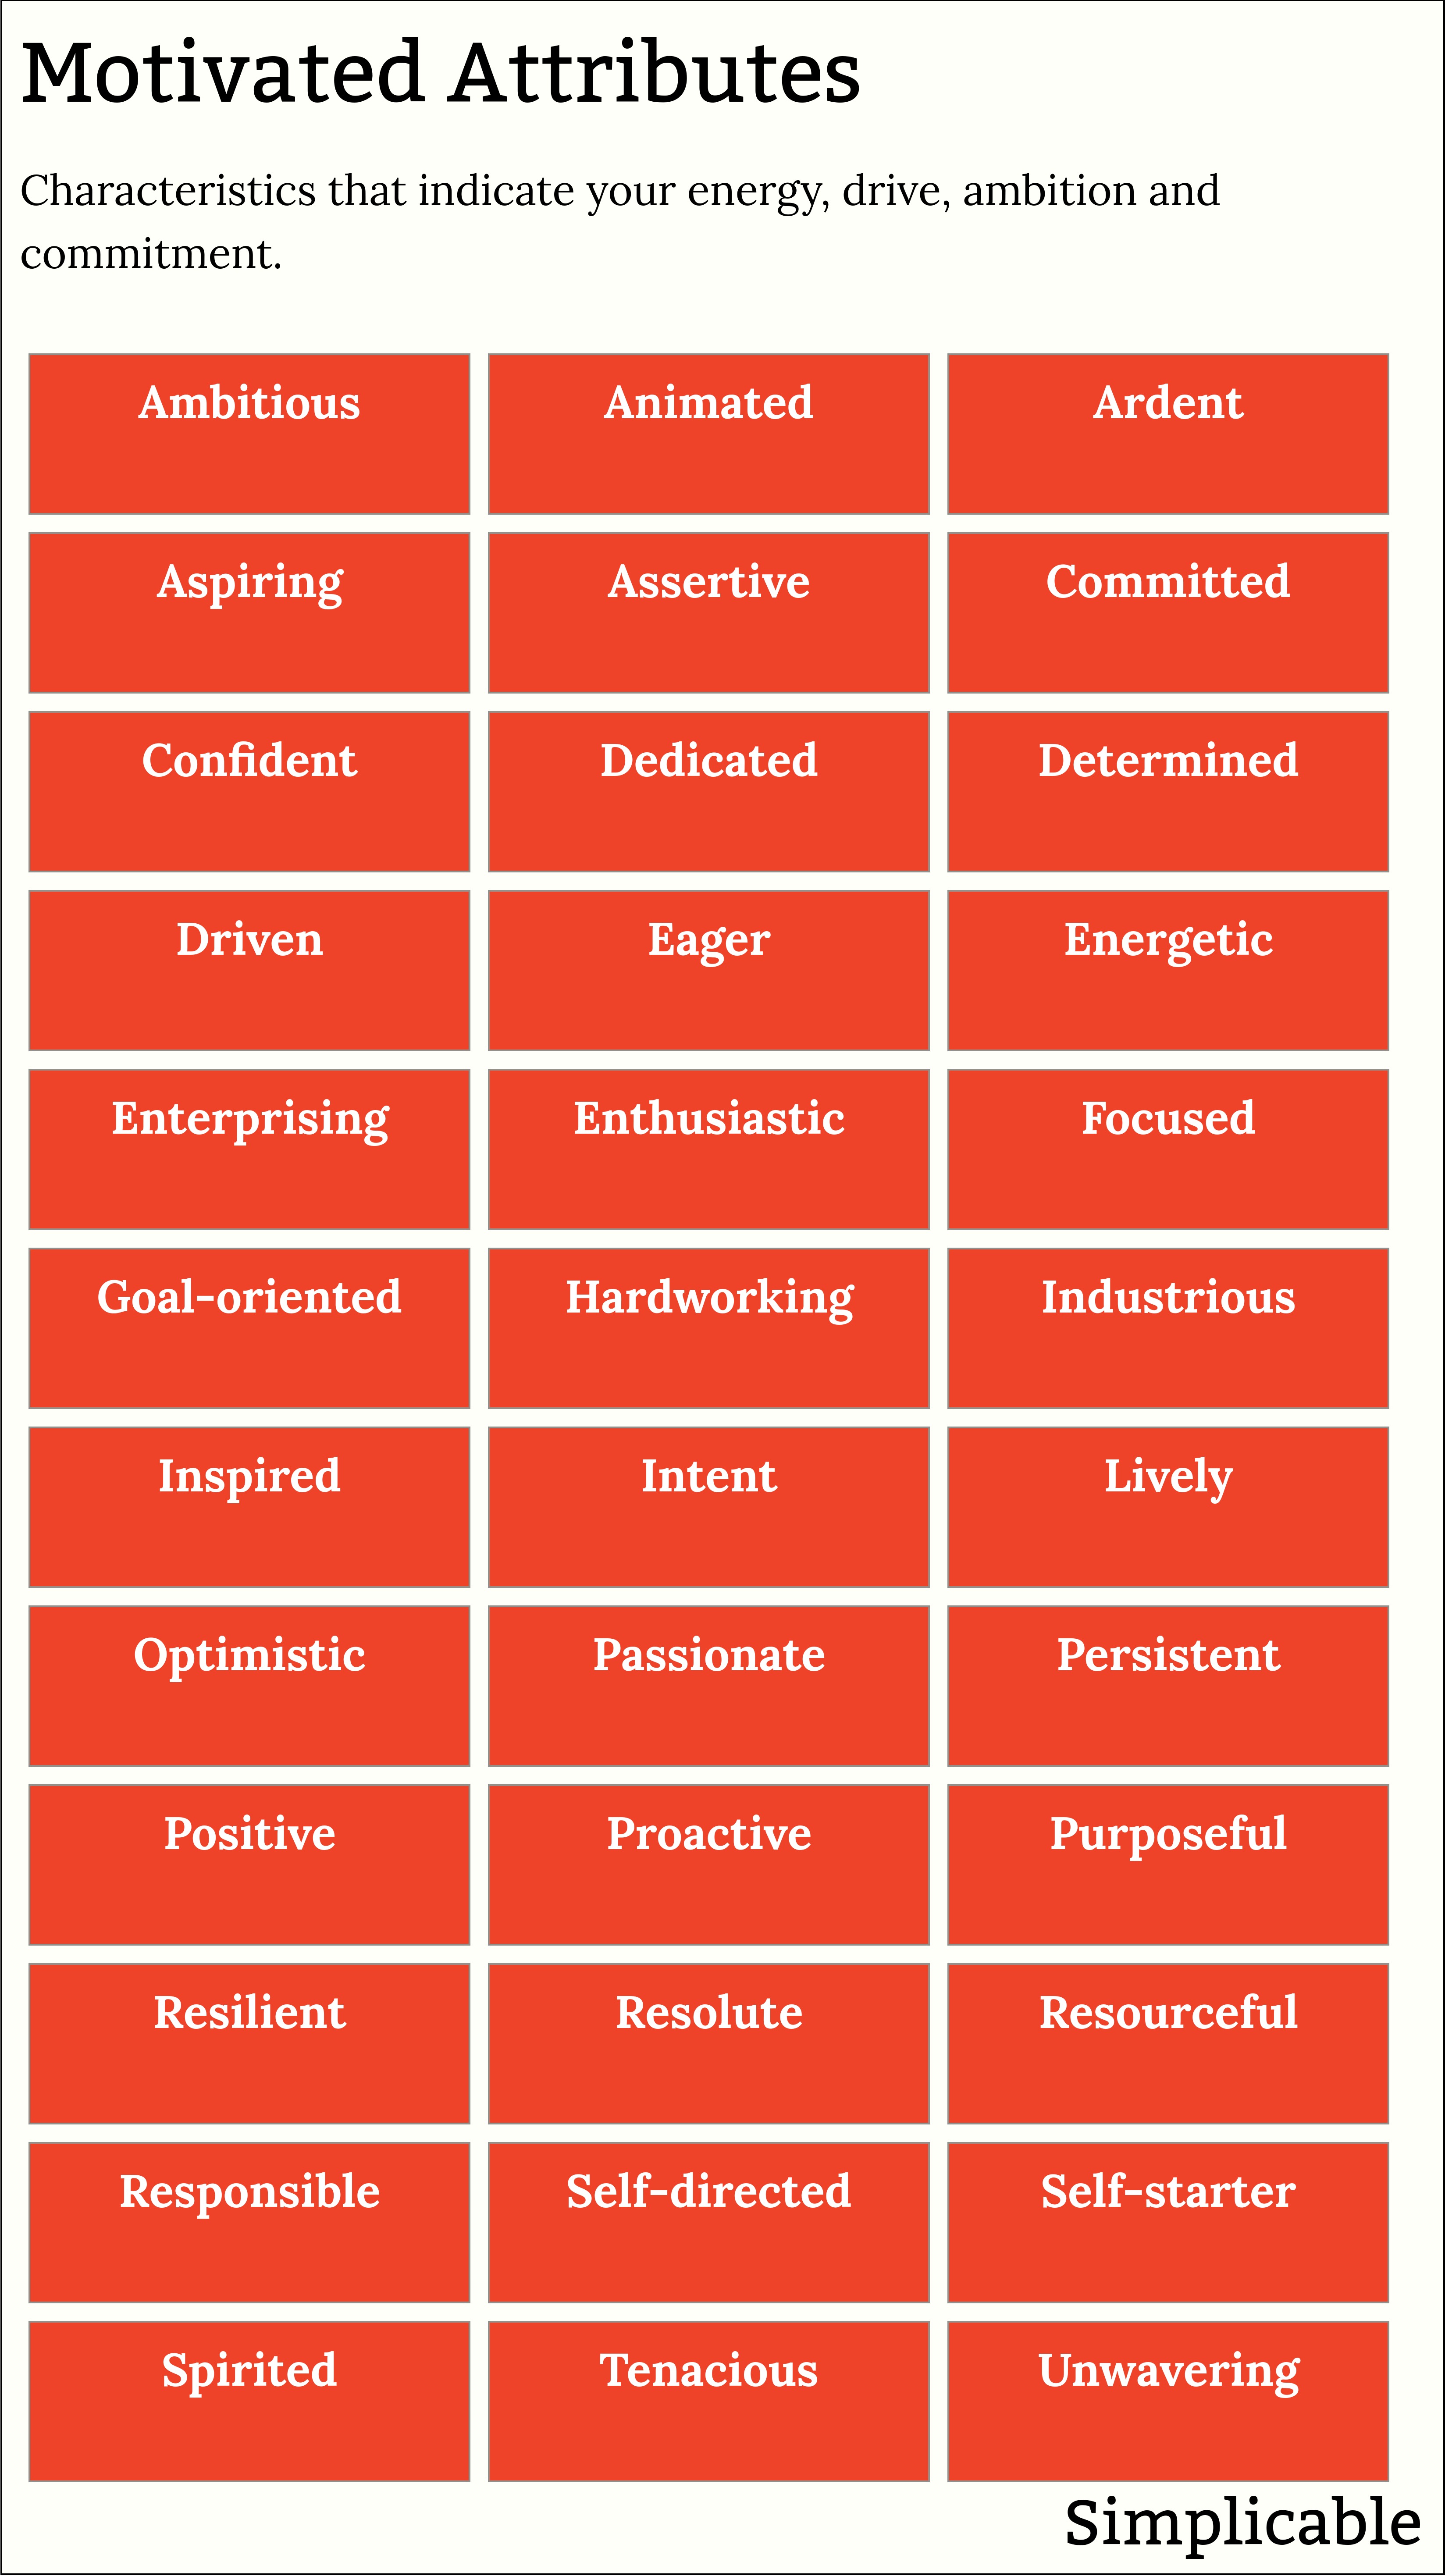 examples of motivated attributes